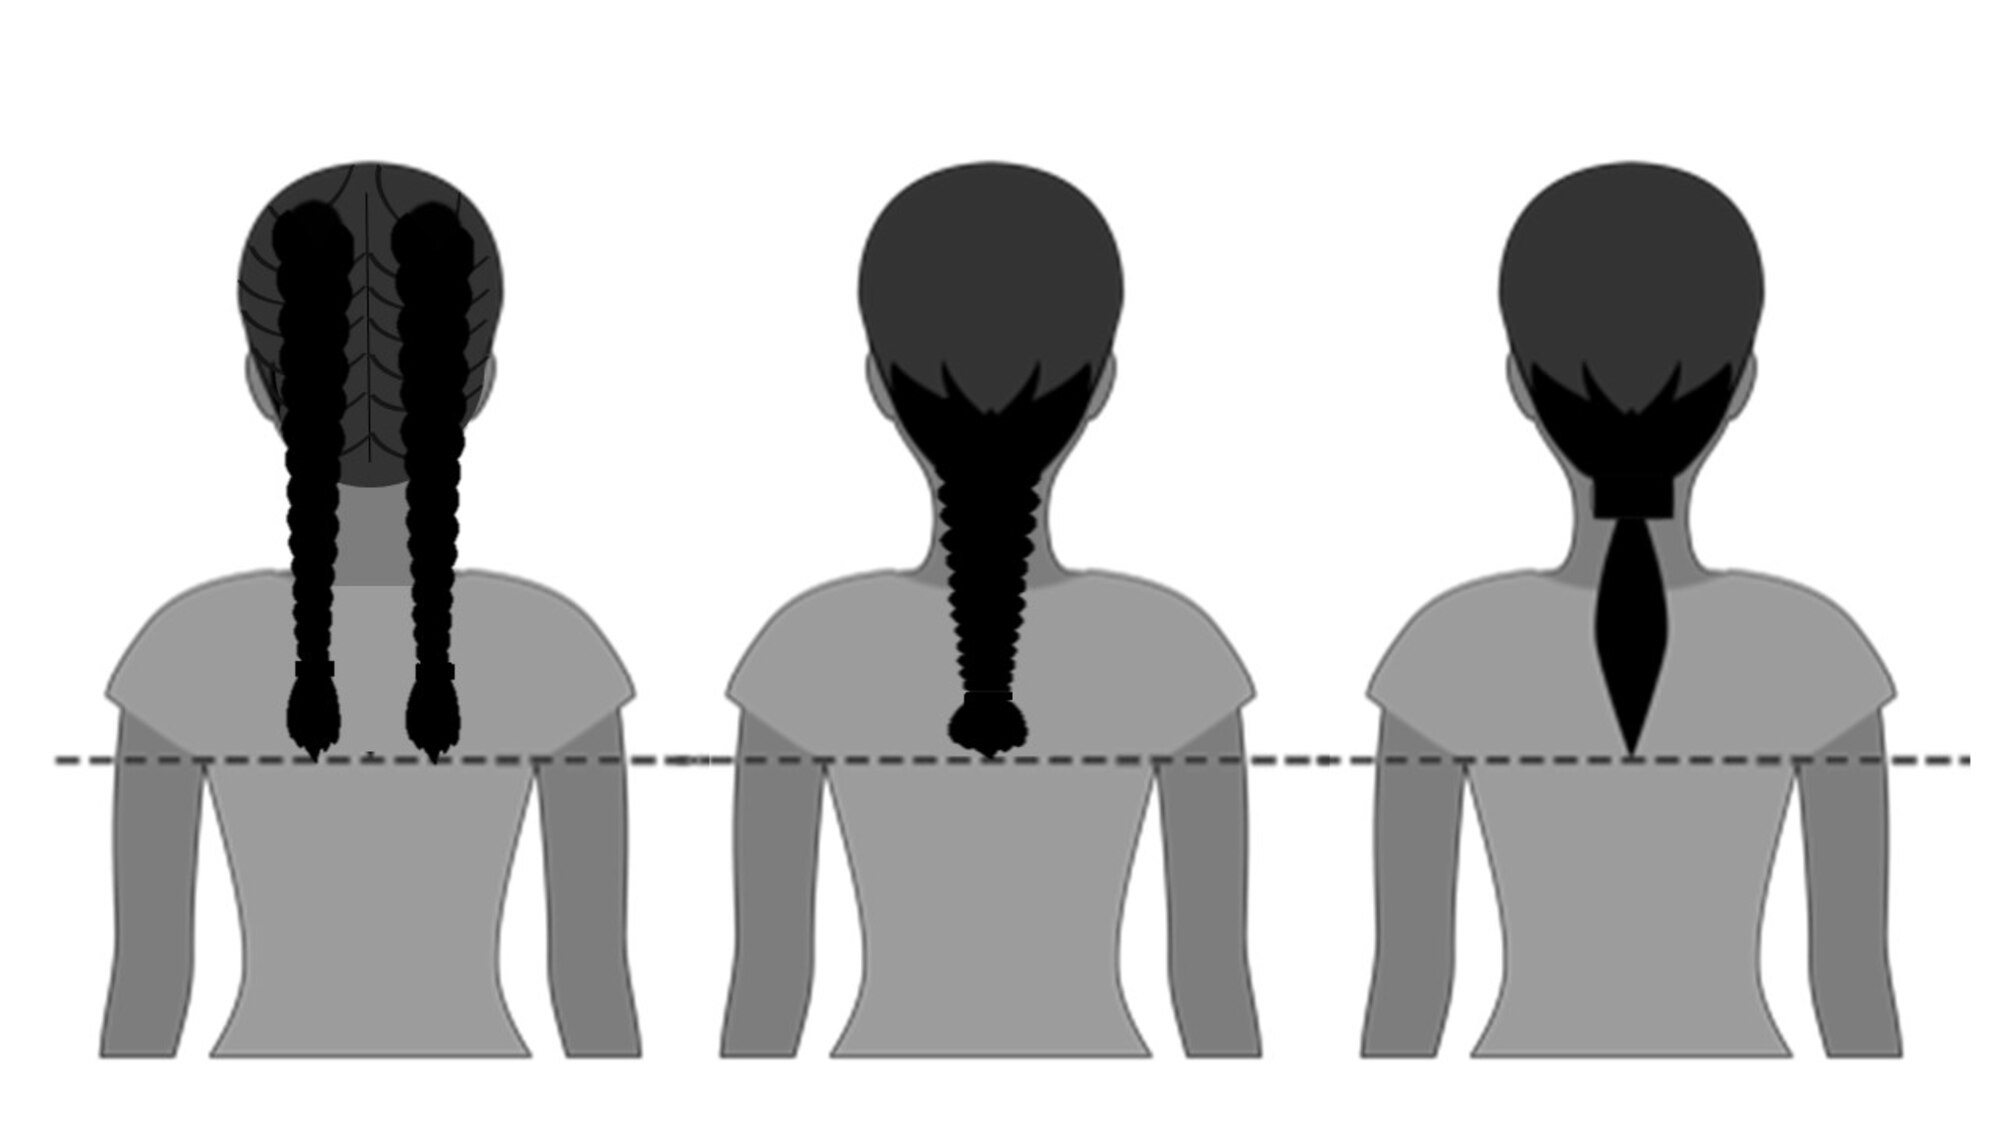 Beginning in February 2021, female Airmen will be able to wear their hair in up to two braids or a single ponytail with bulk not exceeding the width of the head and length not extending below a horizontal line running between the top of each sleeve inseam at the under arm through the shoulder blades. In addition, women’s bangs may now touch their eyebrows, but not cover their eyes. (U.S. Air Force graphic by Corey Parrish)